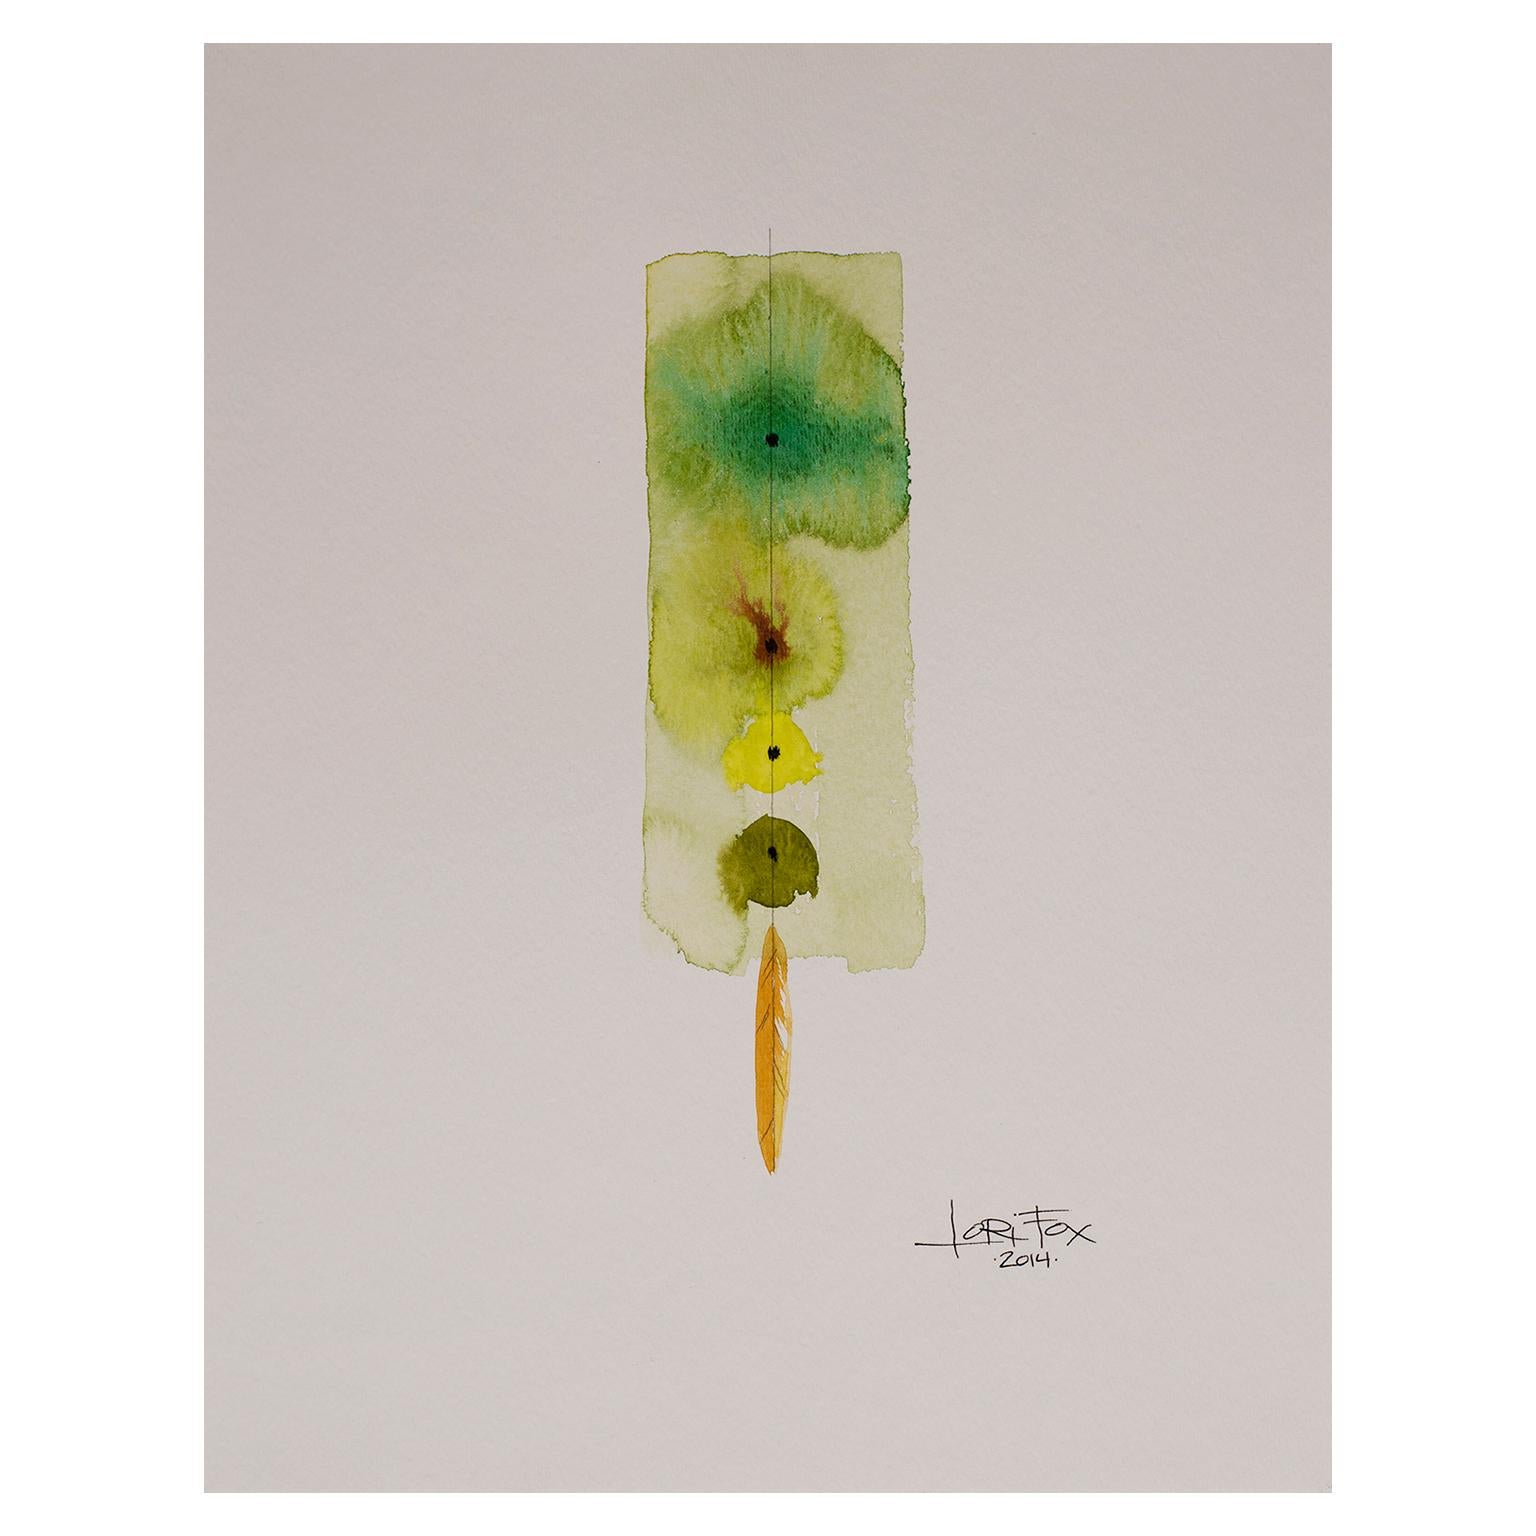 Totem 001 by Lori Fox. Green and yellow hues abstract watercolor and graphite For Sale 1